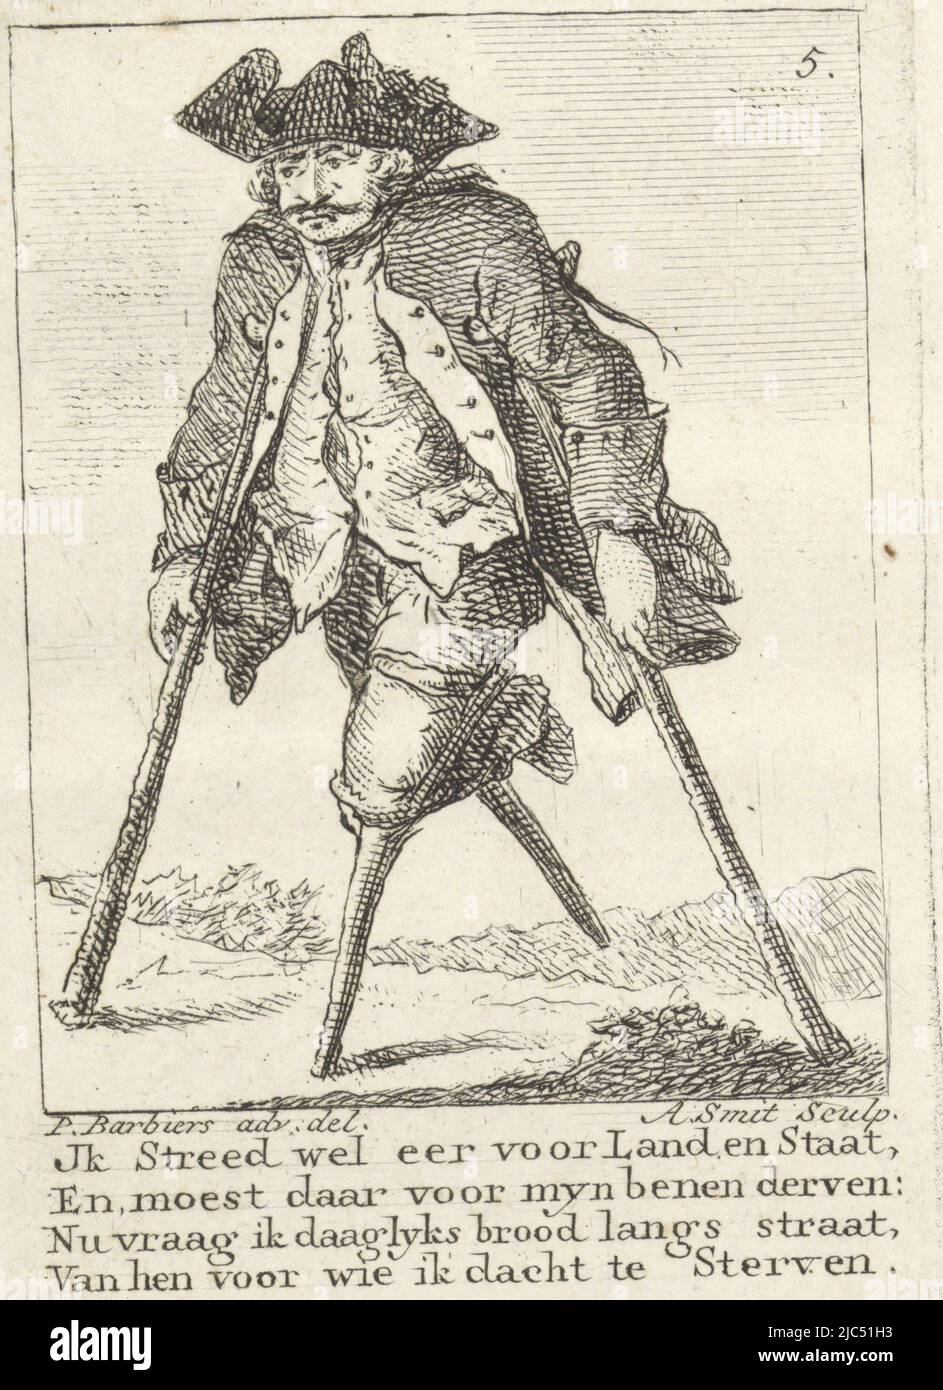 A beggar on crutches with two wooden legs. According to the verse below the print, he lost his legs during the war, fighting for the fatherland., print maker: A. Smit, (mentioned on object), intermediary draughtsman: Pieter Barbiers (I), (mentioned on object), Amsterdam, 1764 - 1792, paper, etching, engraving, h 109 mm - w 77 mm Stock Photo